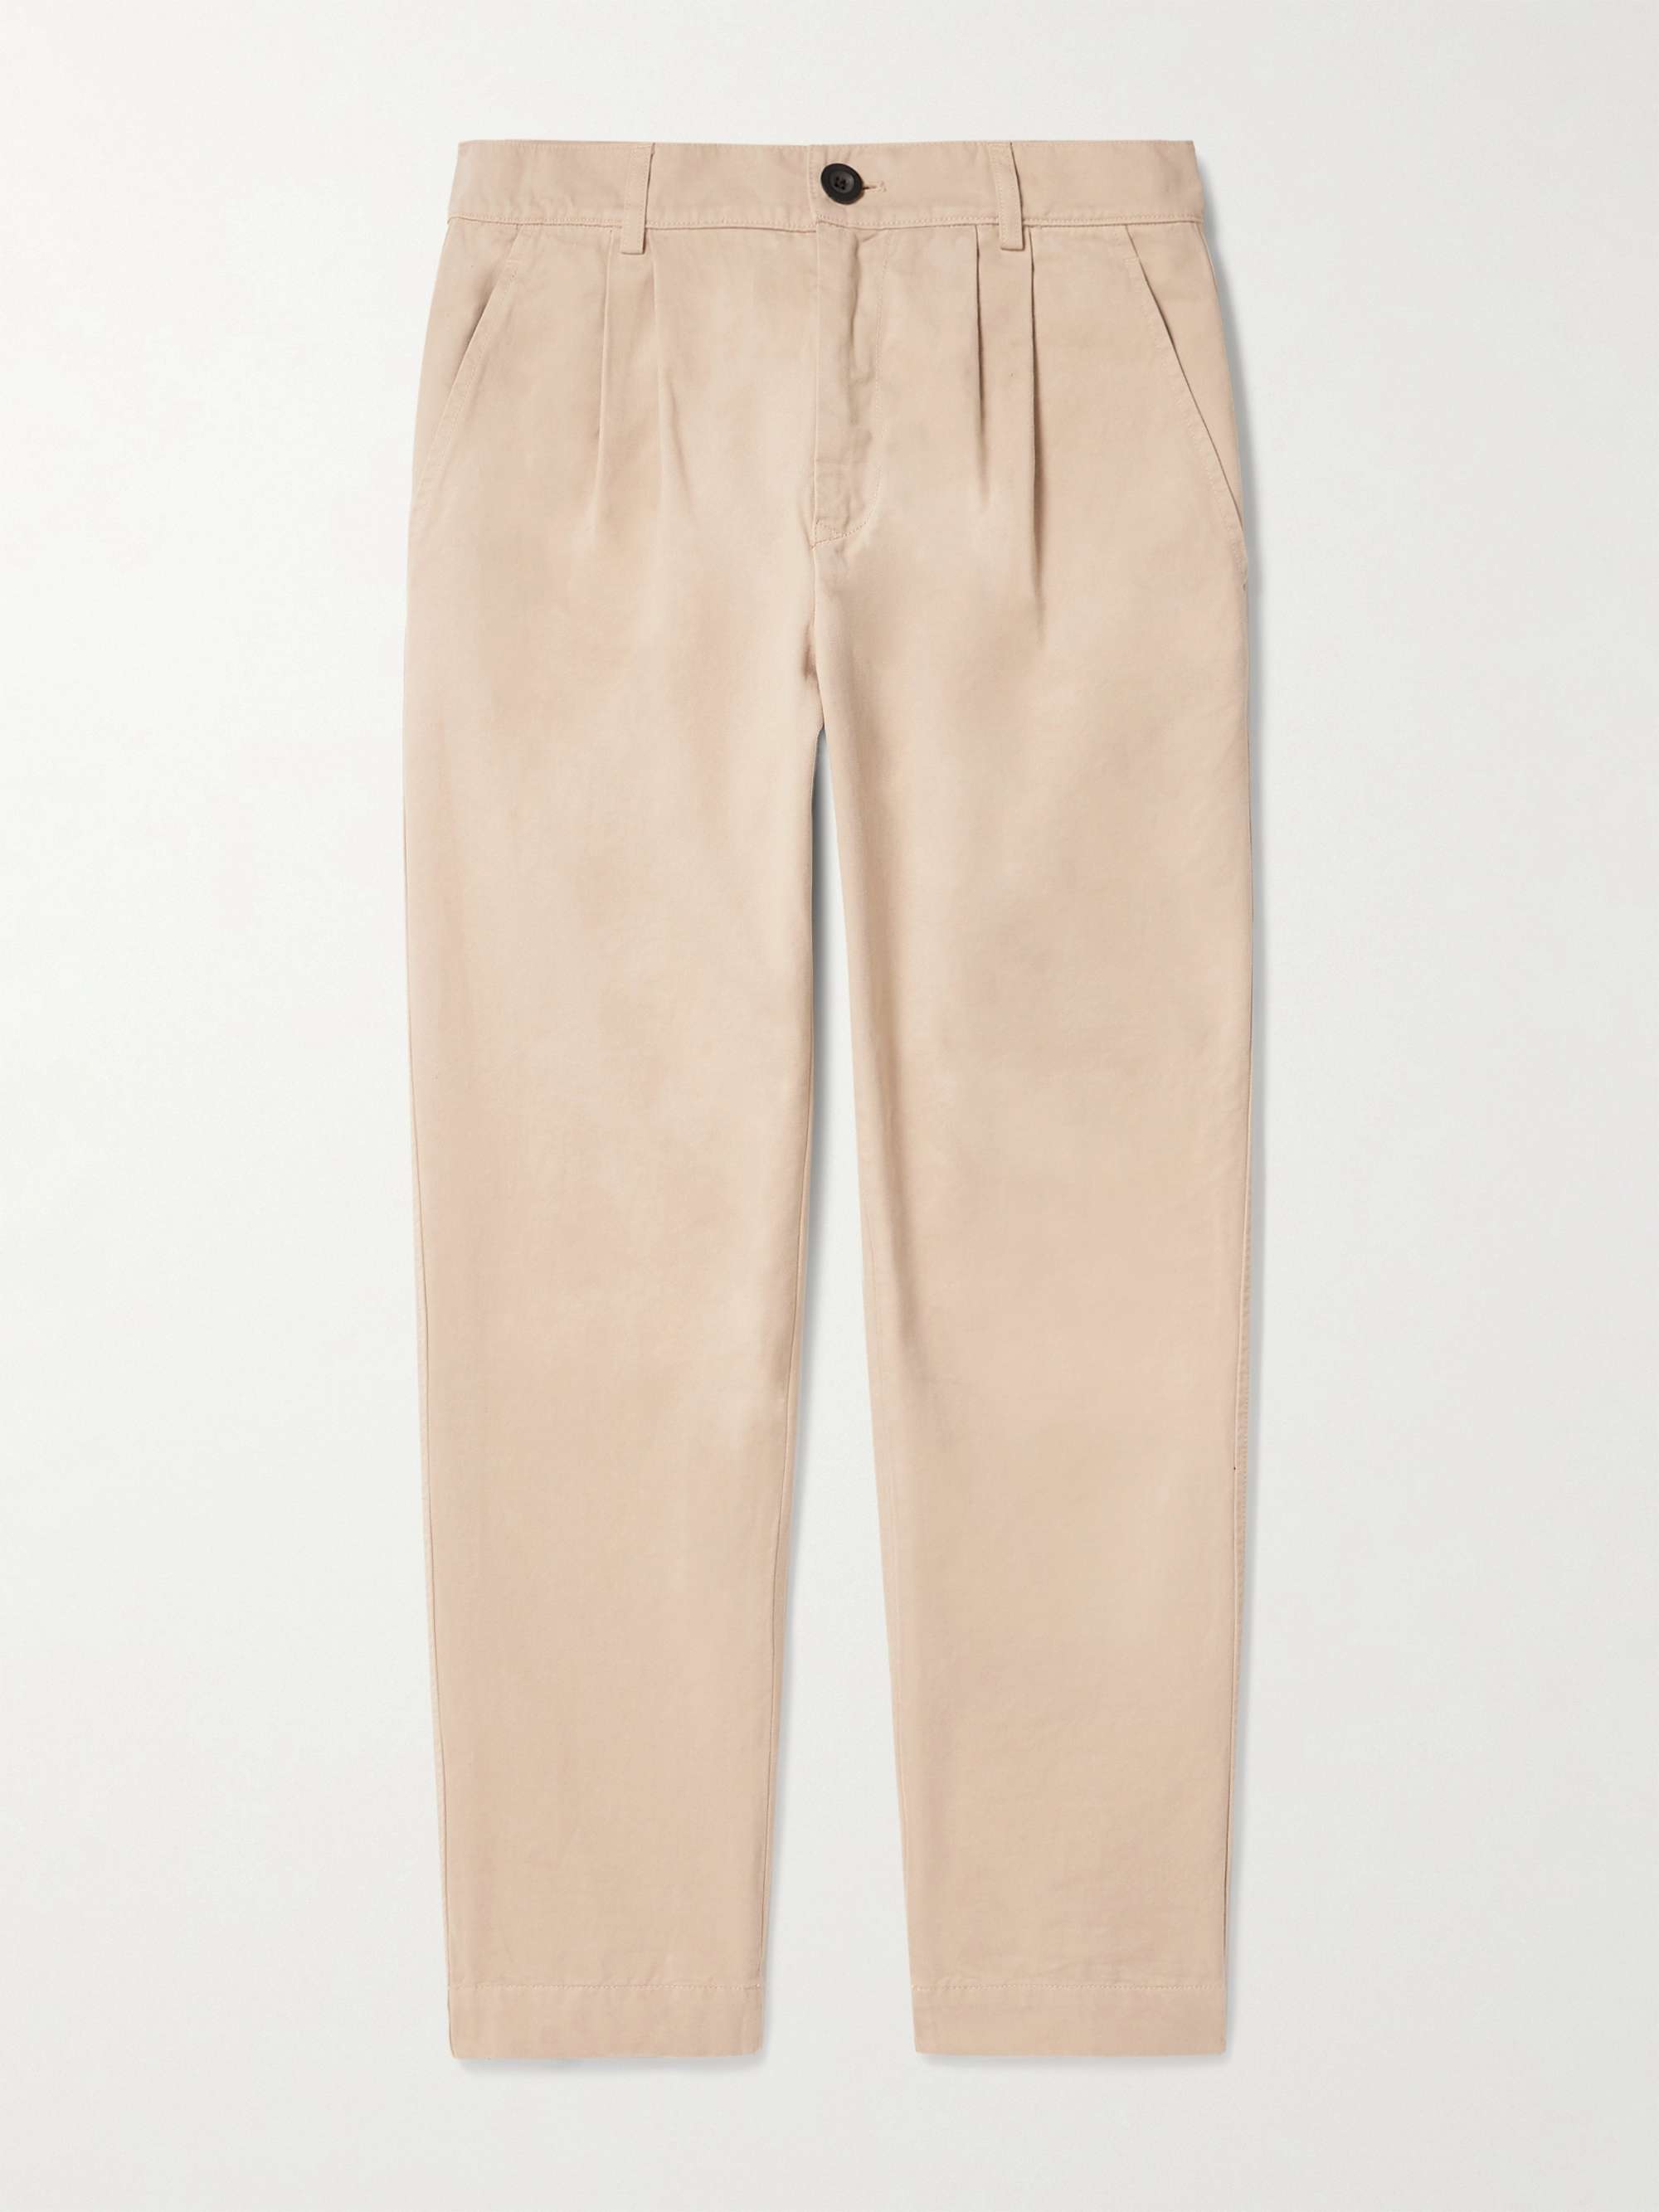 Buy BE INDI Women Cream-Coloured Straight Fit Pleated Cotton Trousers S  (SPYL11496-S) at Amazon.in